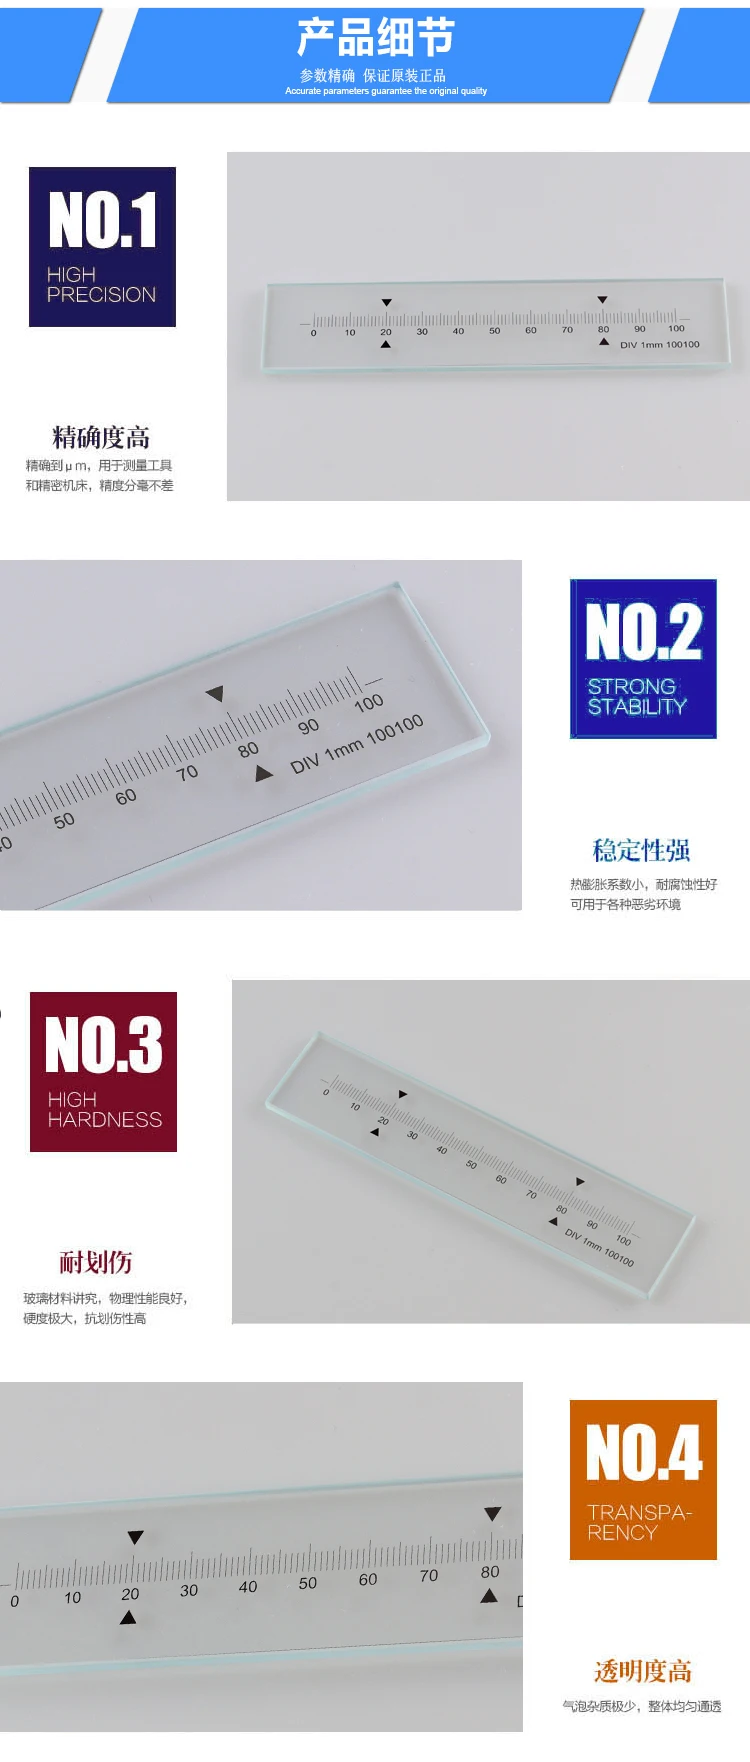 Factory Supply Optical Sight HCL03-100 Quartz Corrosion Resistance  Measuring Tools Ruler For Vision Measuring Machine - Buy Factory Supply  Optical Sight HCL03-100 Quartz Corrosion Resistance Measuring Tools Ruler  For Vision Measuring Machine